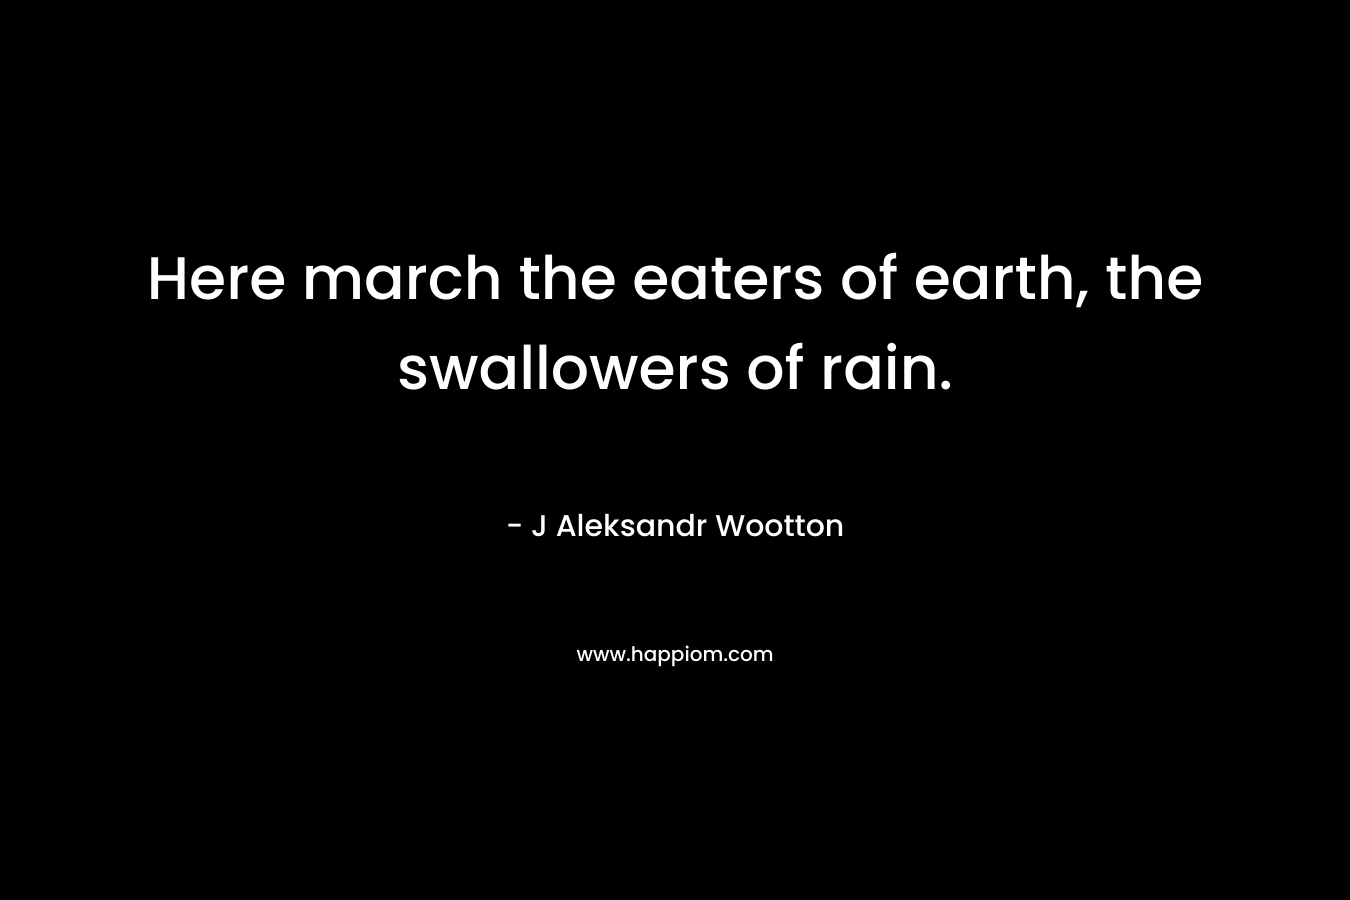 Here march the eaters of earth, the swallowers of rain. – J Aleksandr Wootton